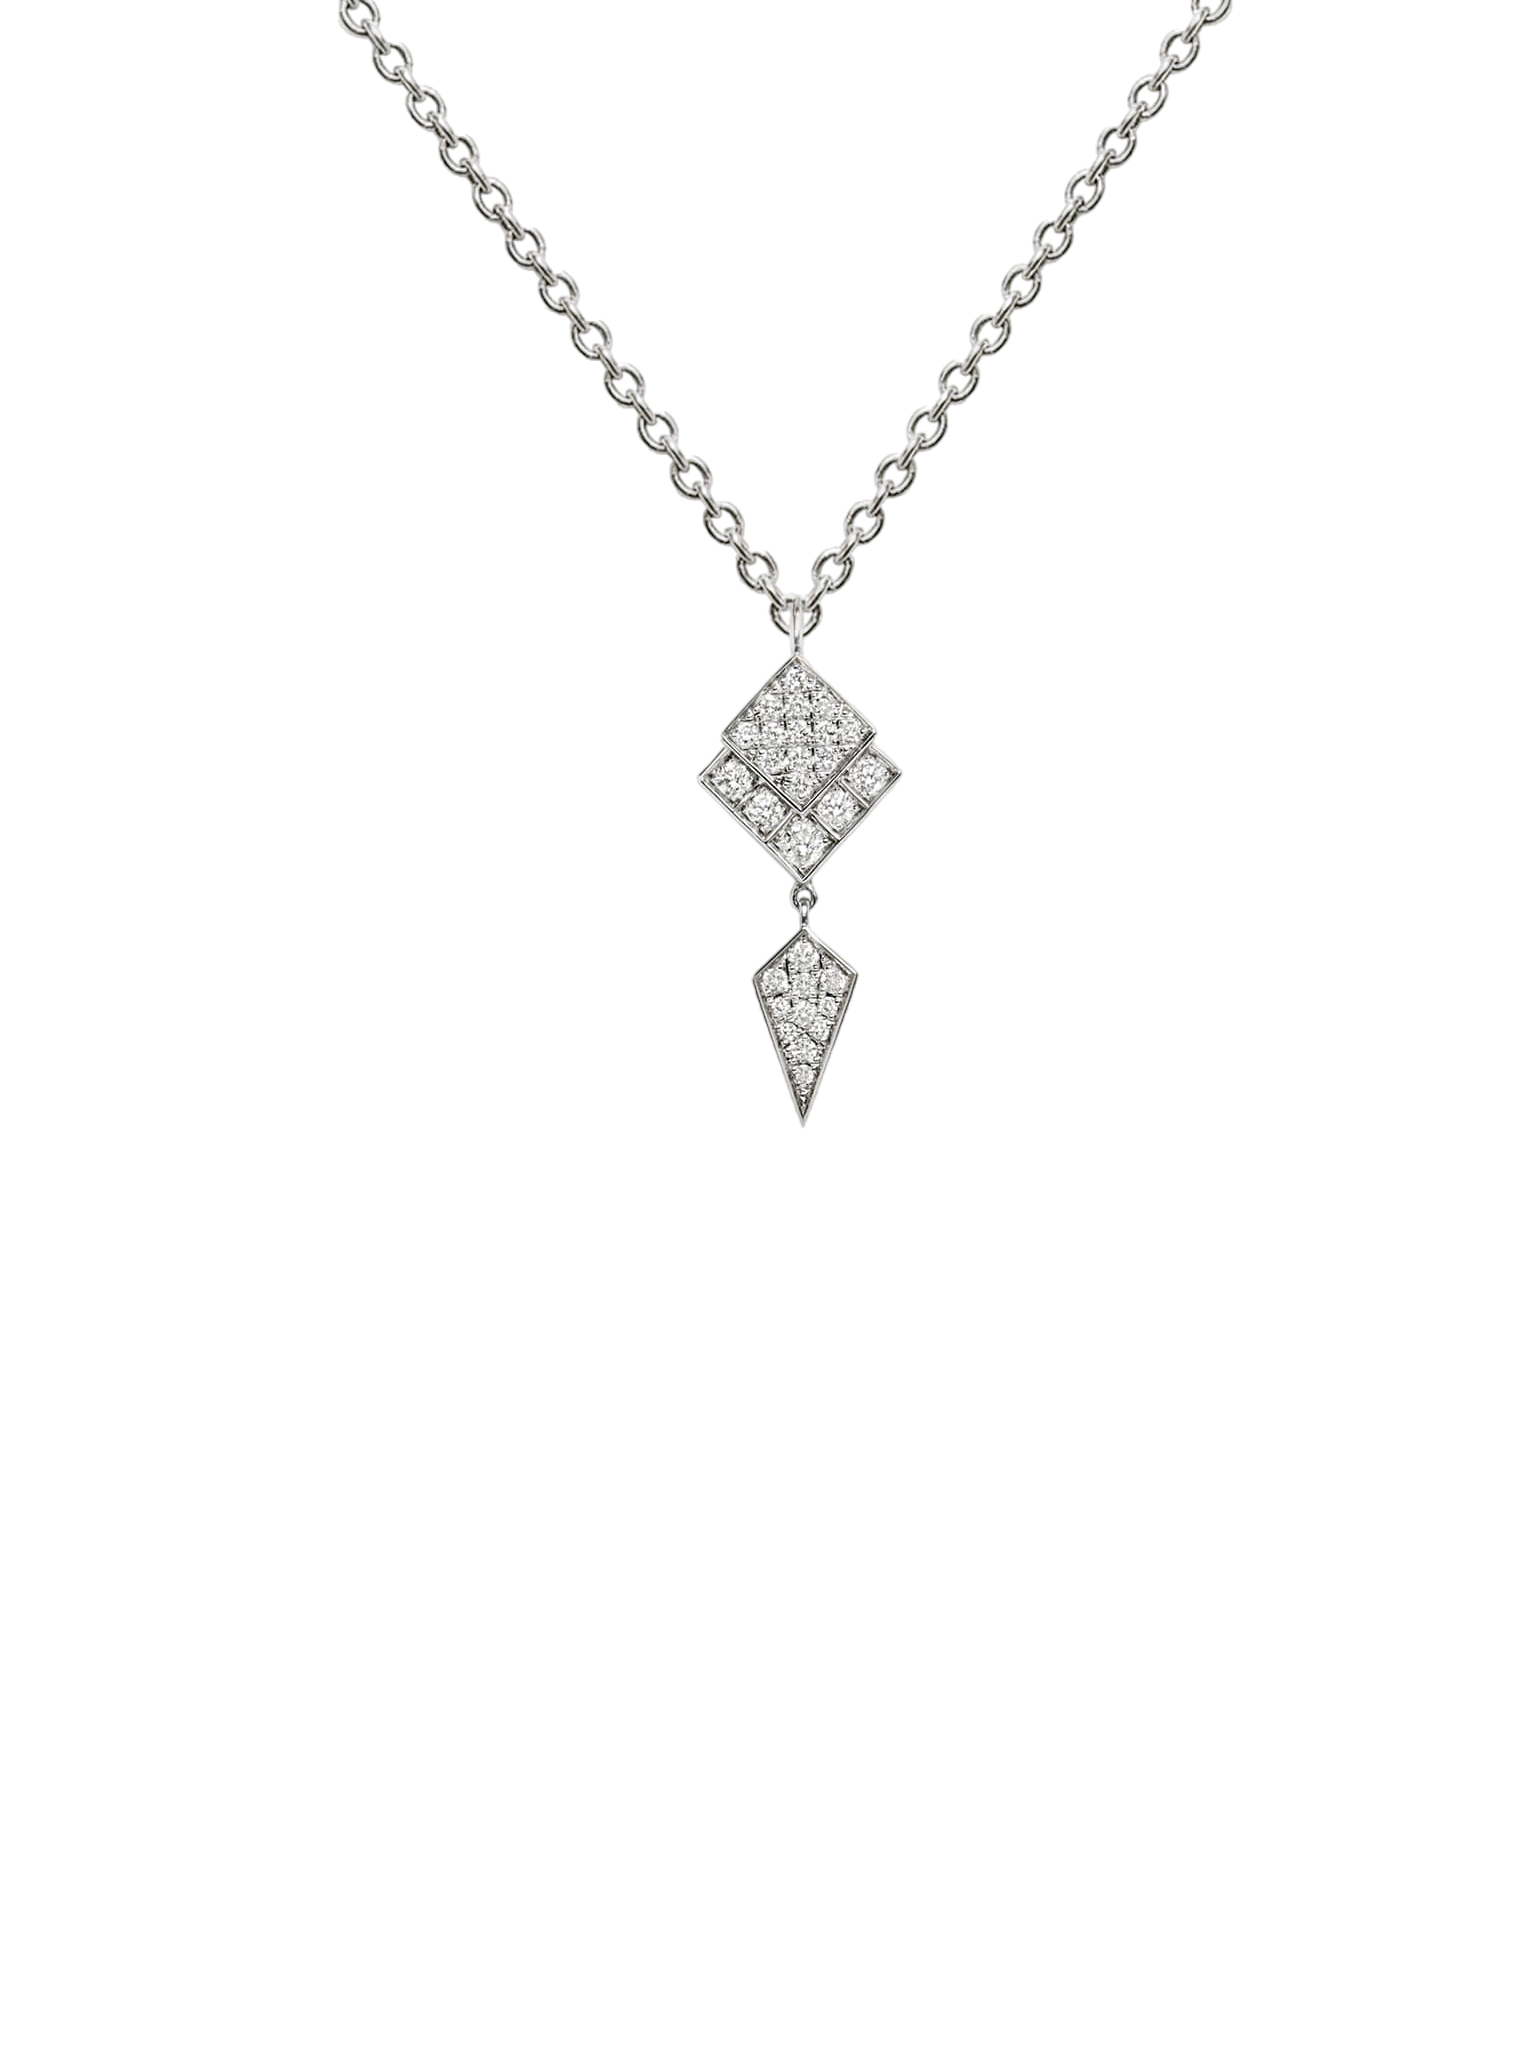 Necklace stairway diamonds & silver